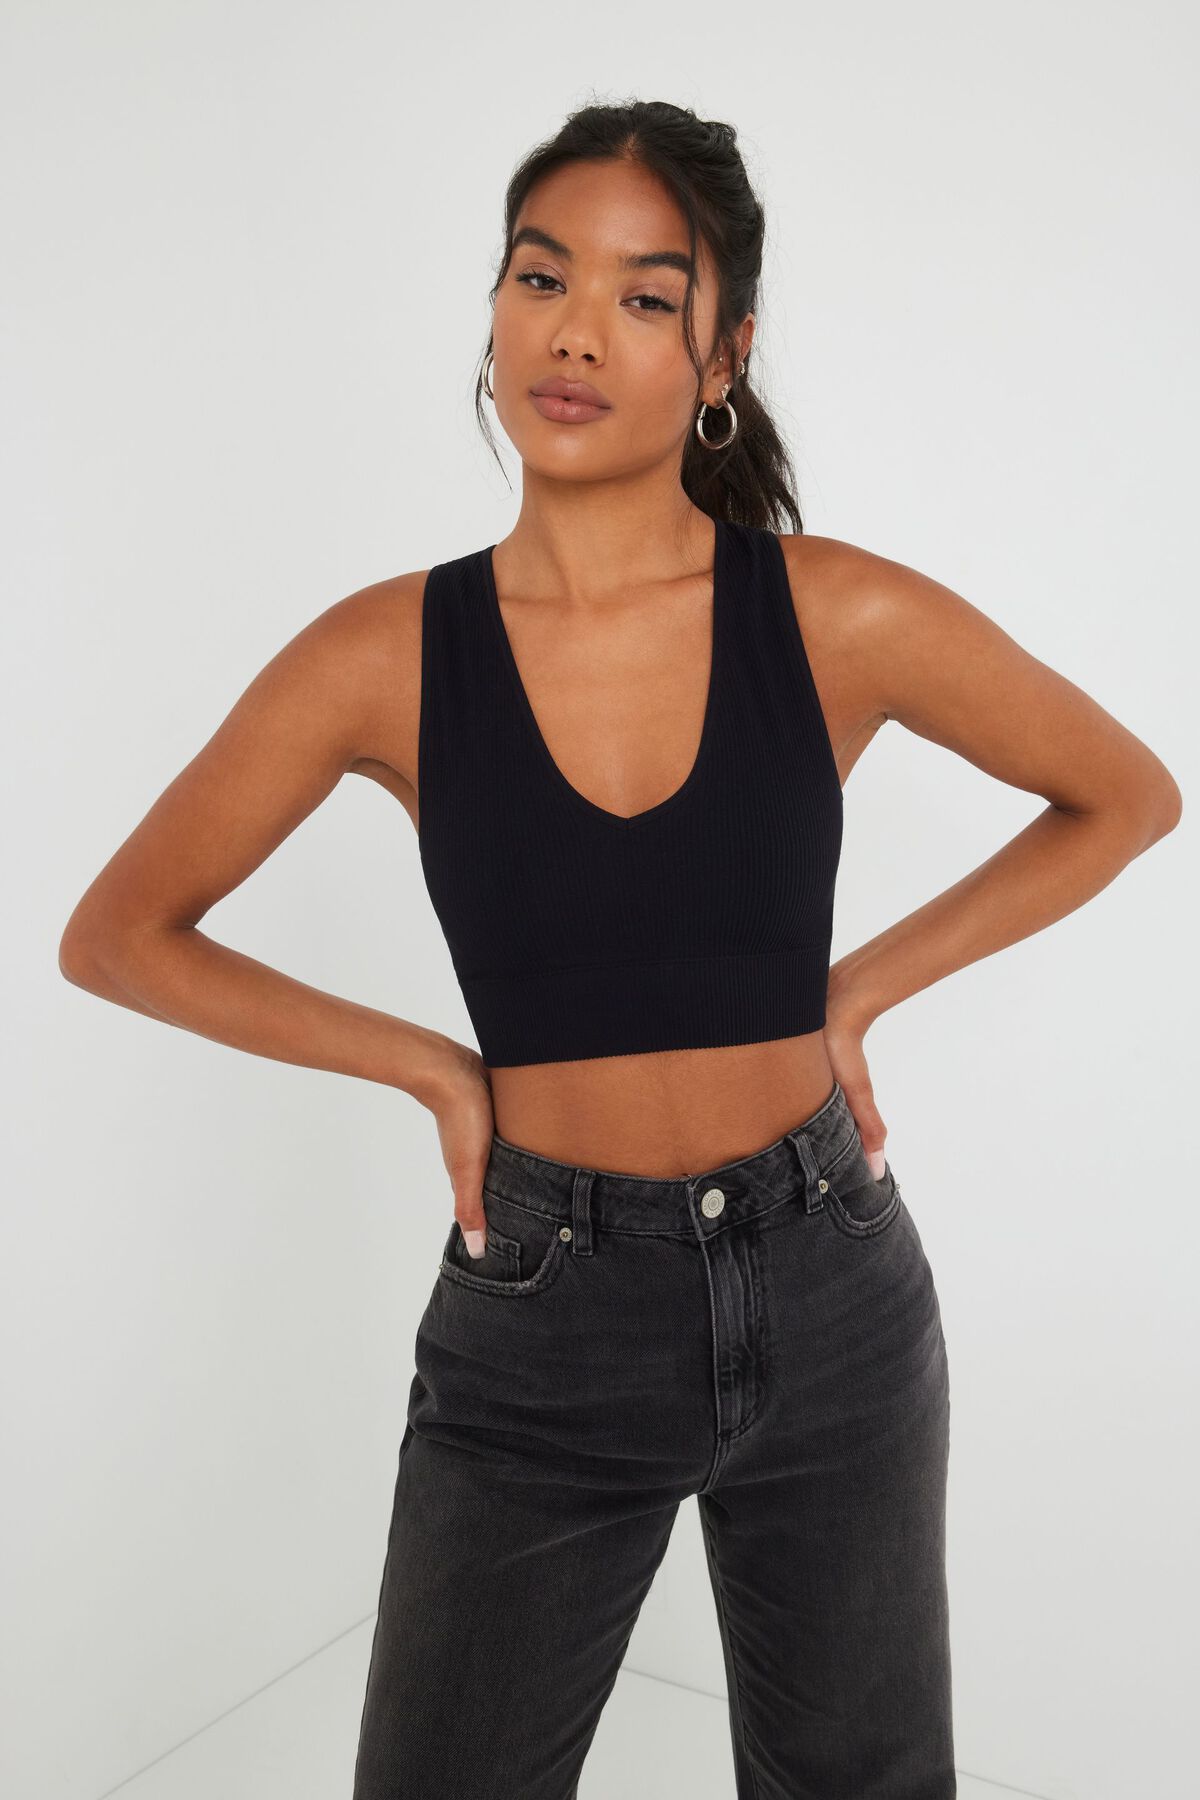 These Seamless Tank Tops Are Perfect for Travel